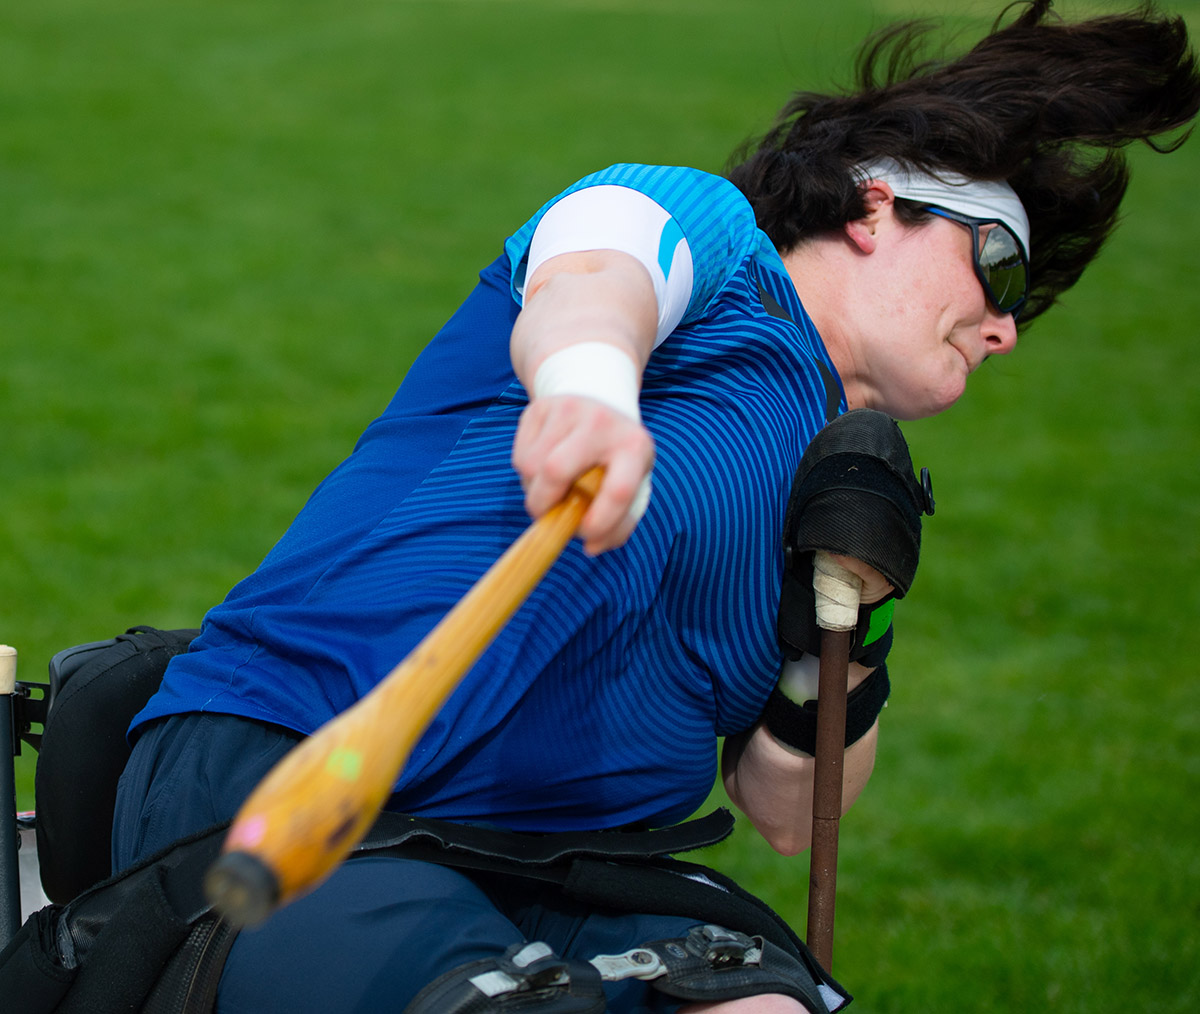 Cassie Mitchell in the midst of her club throw at the U.S. Paralympic Track & Field Trials in June.